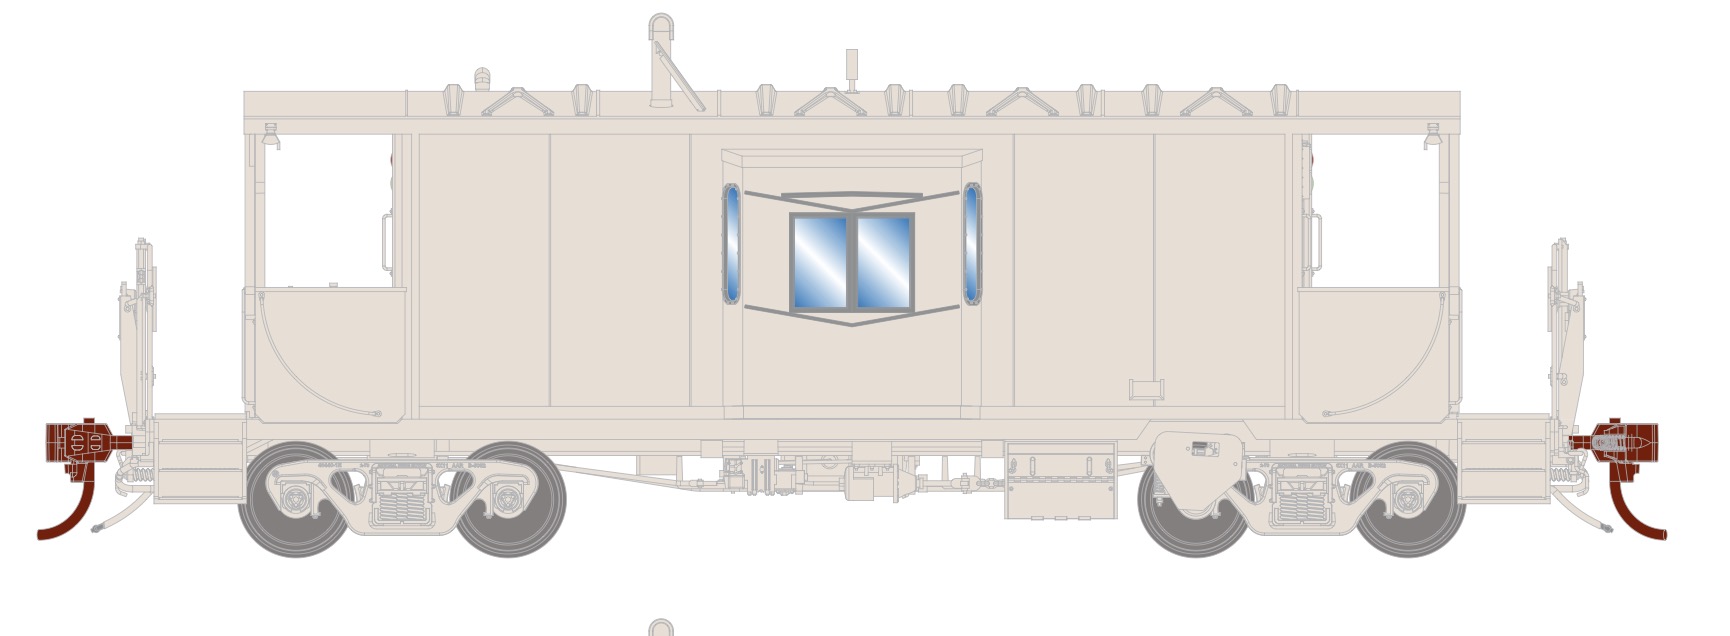 N Scale - Athearn - 1651 - Caboose, Bay Window, CA-11a - Undecorated